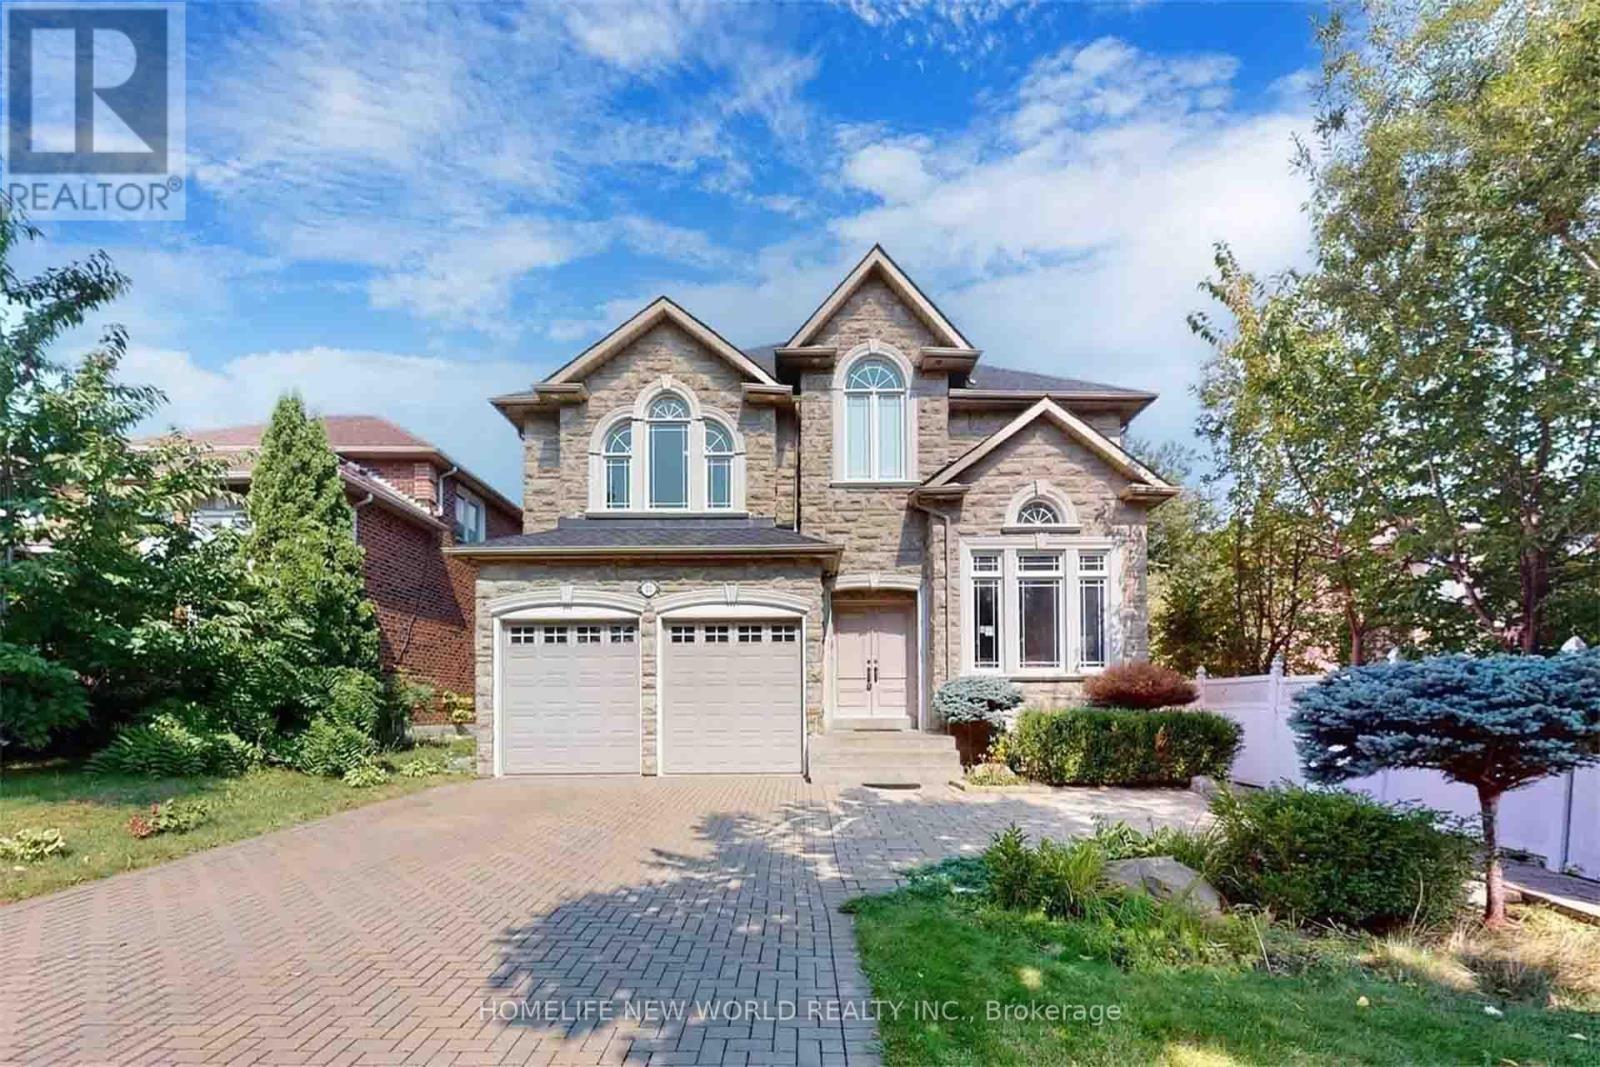 11 Whalen Court, Richmond Hill, 4 Bedrooms Bedrooms, ,3 BathroomsBathrooms,Single Family,For Rent,Whalen,N8025618